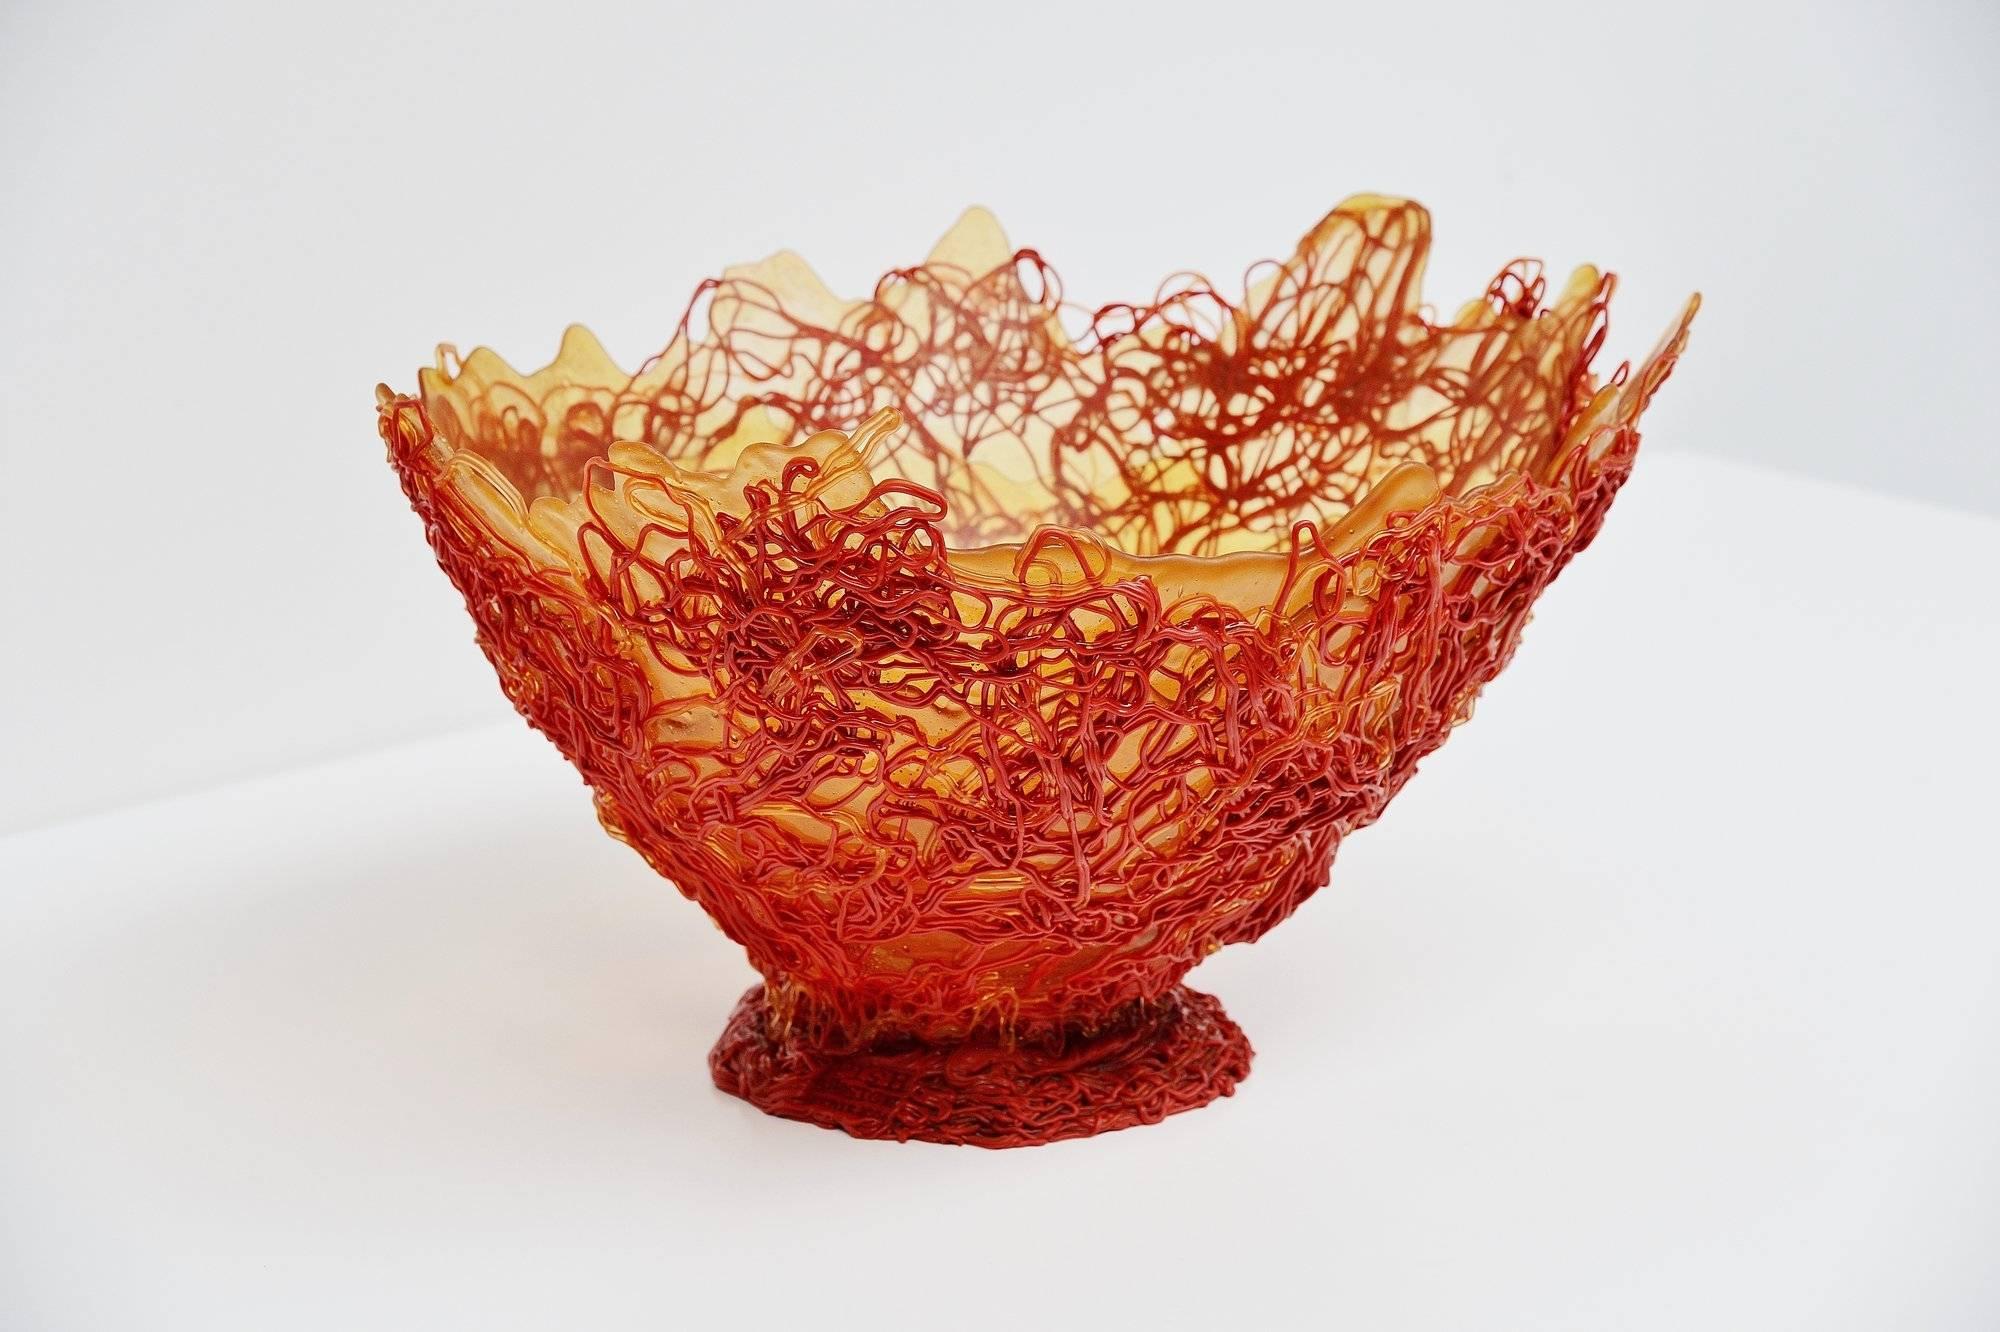 Ultra rare and extremely large spaghetti bowl designed by Gaetano Pesce for Fish Design, Italy 2004. This amazing large bowl is from the spaghetti series designed by Pesce and I have never seen a bowl in this size before. It has been in our personal